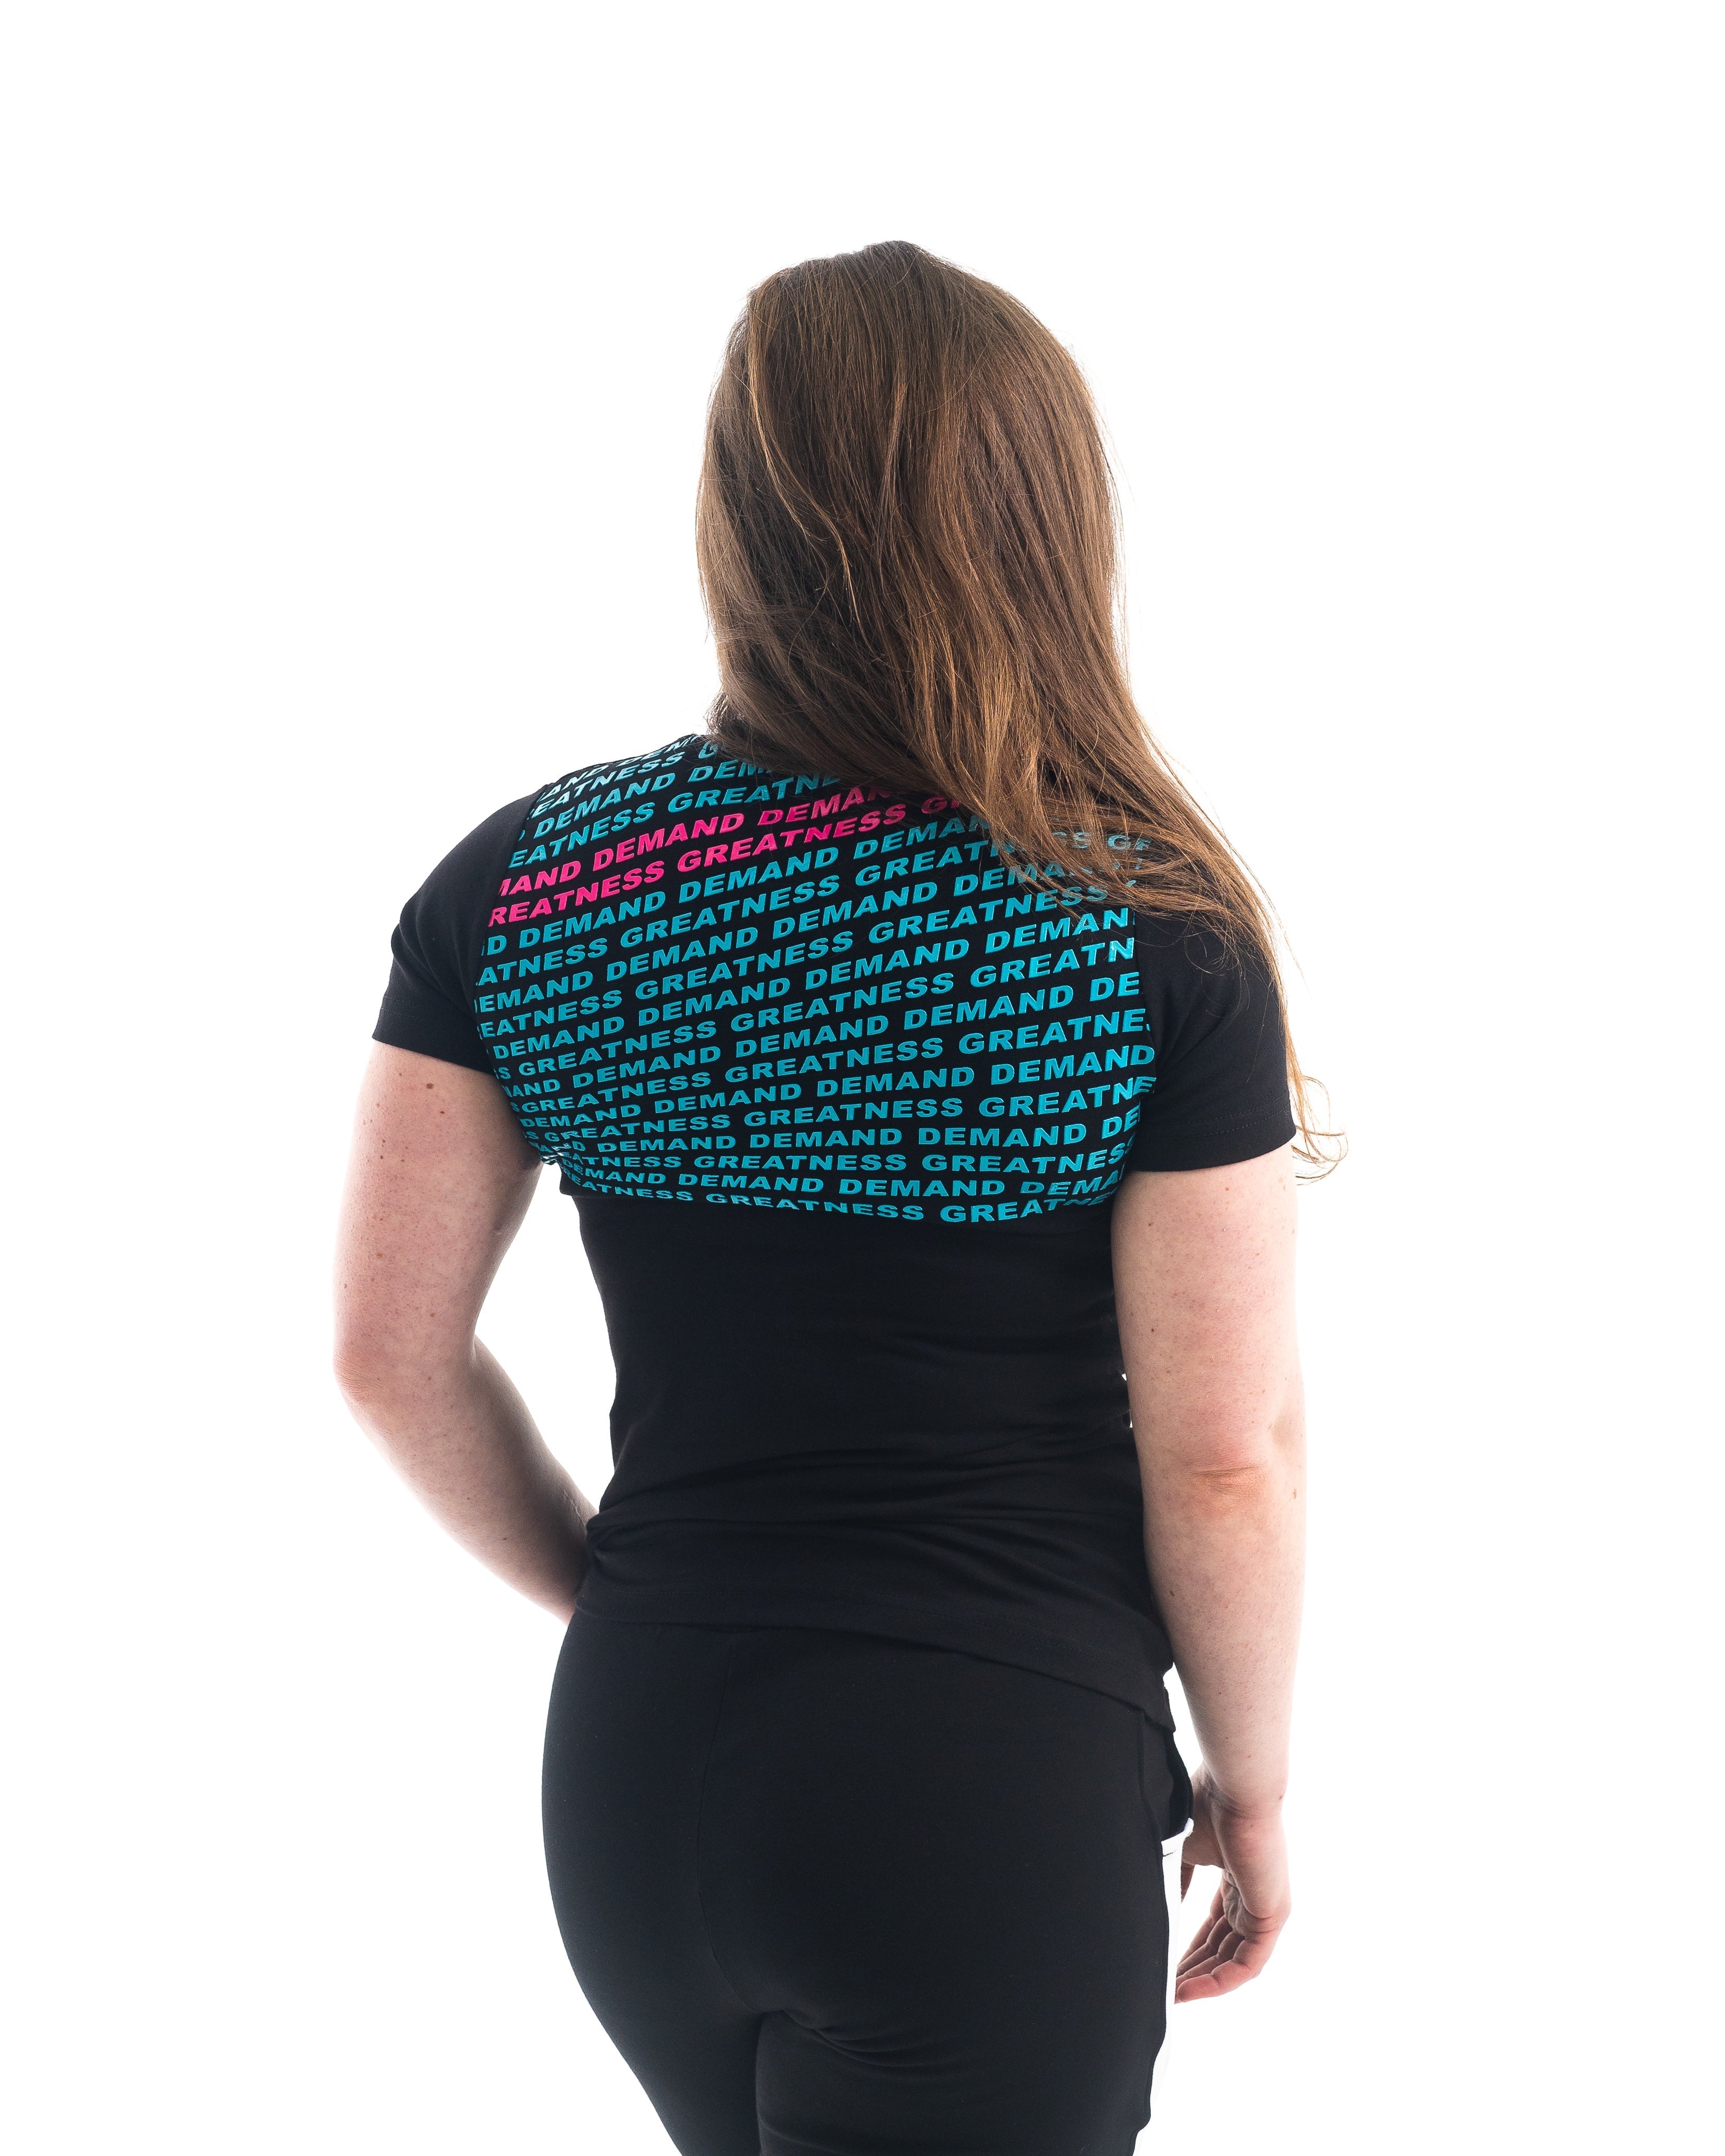 VorText Flamingo Women's Bar Grip Shirt. Make a stand on the platform as you continue to approach perfection to prove you are not of this world. Whether pressing, pulling, squatting or any other variational movement the knurling is always there. The silicone bar grip helps with slippery commercial benches and bars and anchors the barbell to your back. All A7 Powerlifting Equipment shipping to France, Spain, Ireland, Germany, Italy, Sweden and EU.